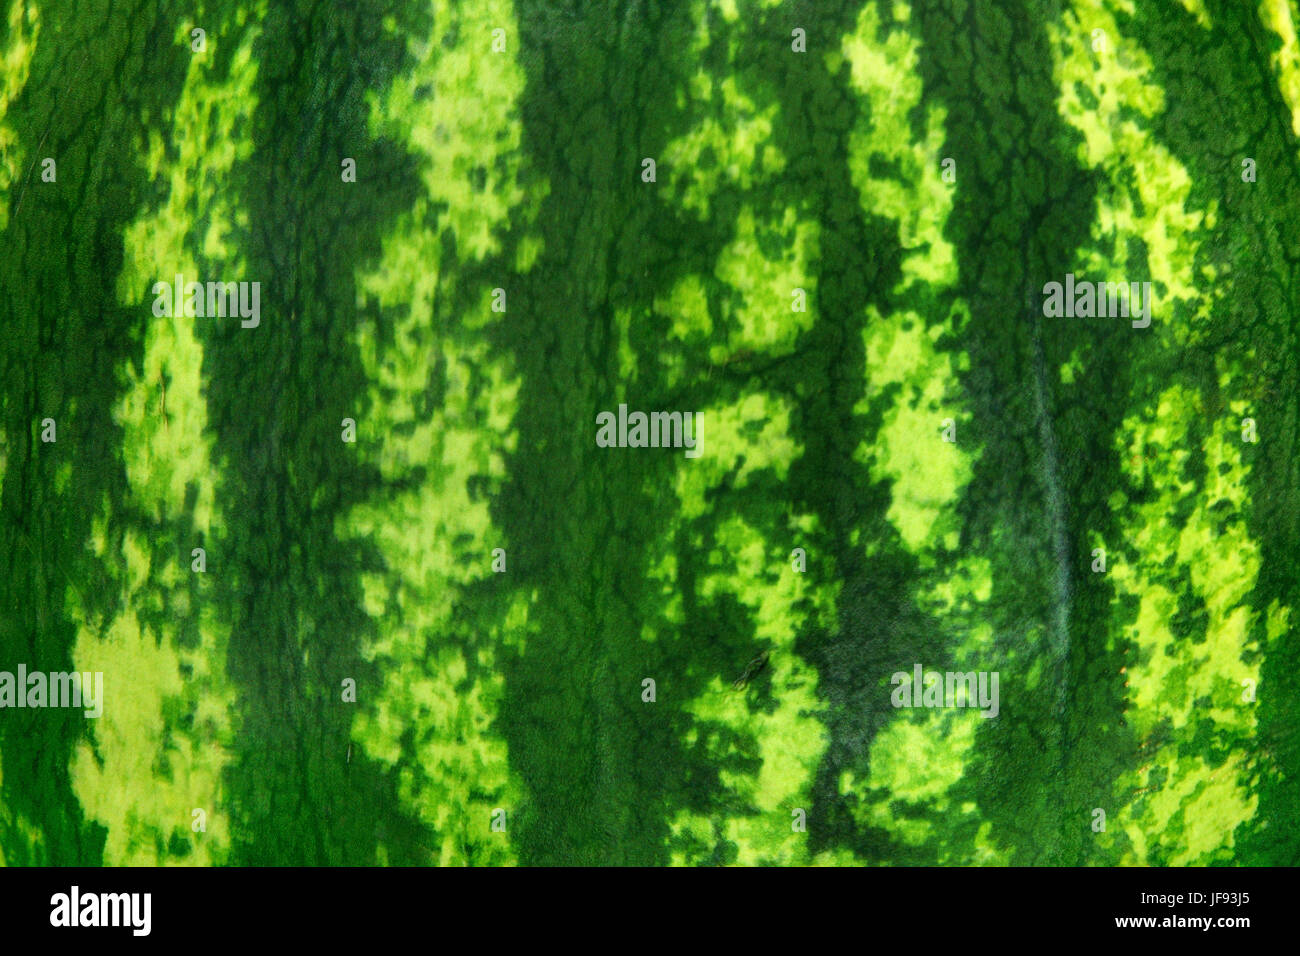 Abstract texture whit watermelon skin Stock Photo